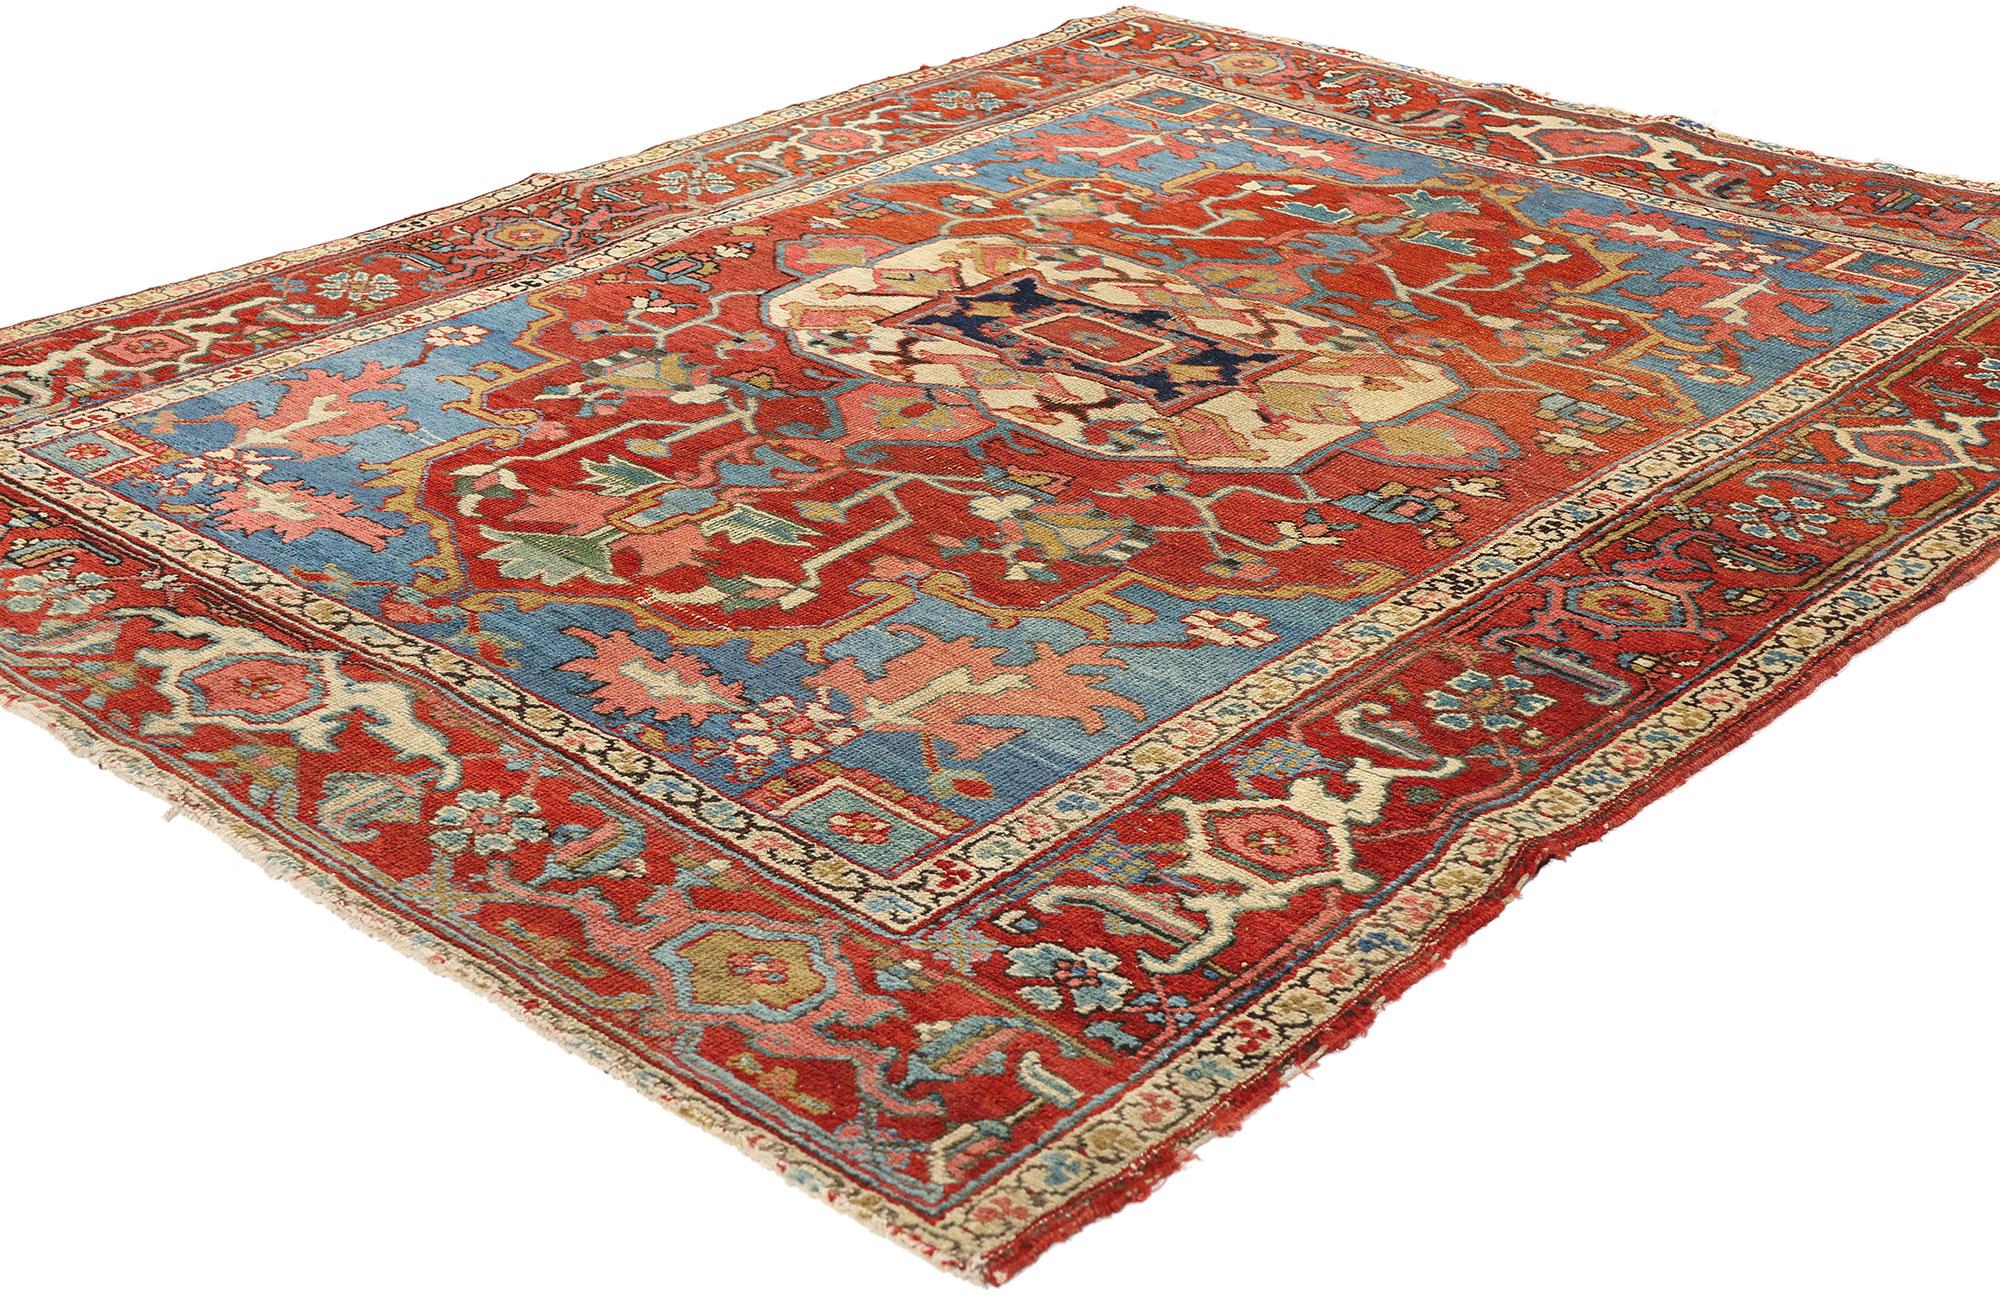 78168 Antique Persian Serapi Rug, 04'09 x 06'01. Embark on a journey through time with our hand-knotted wool antique Persian Serapi rug, a testament to the rich heritage of craftsmanship rooted in the rugged mountains of Azerbaijan, Northwest